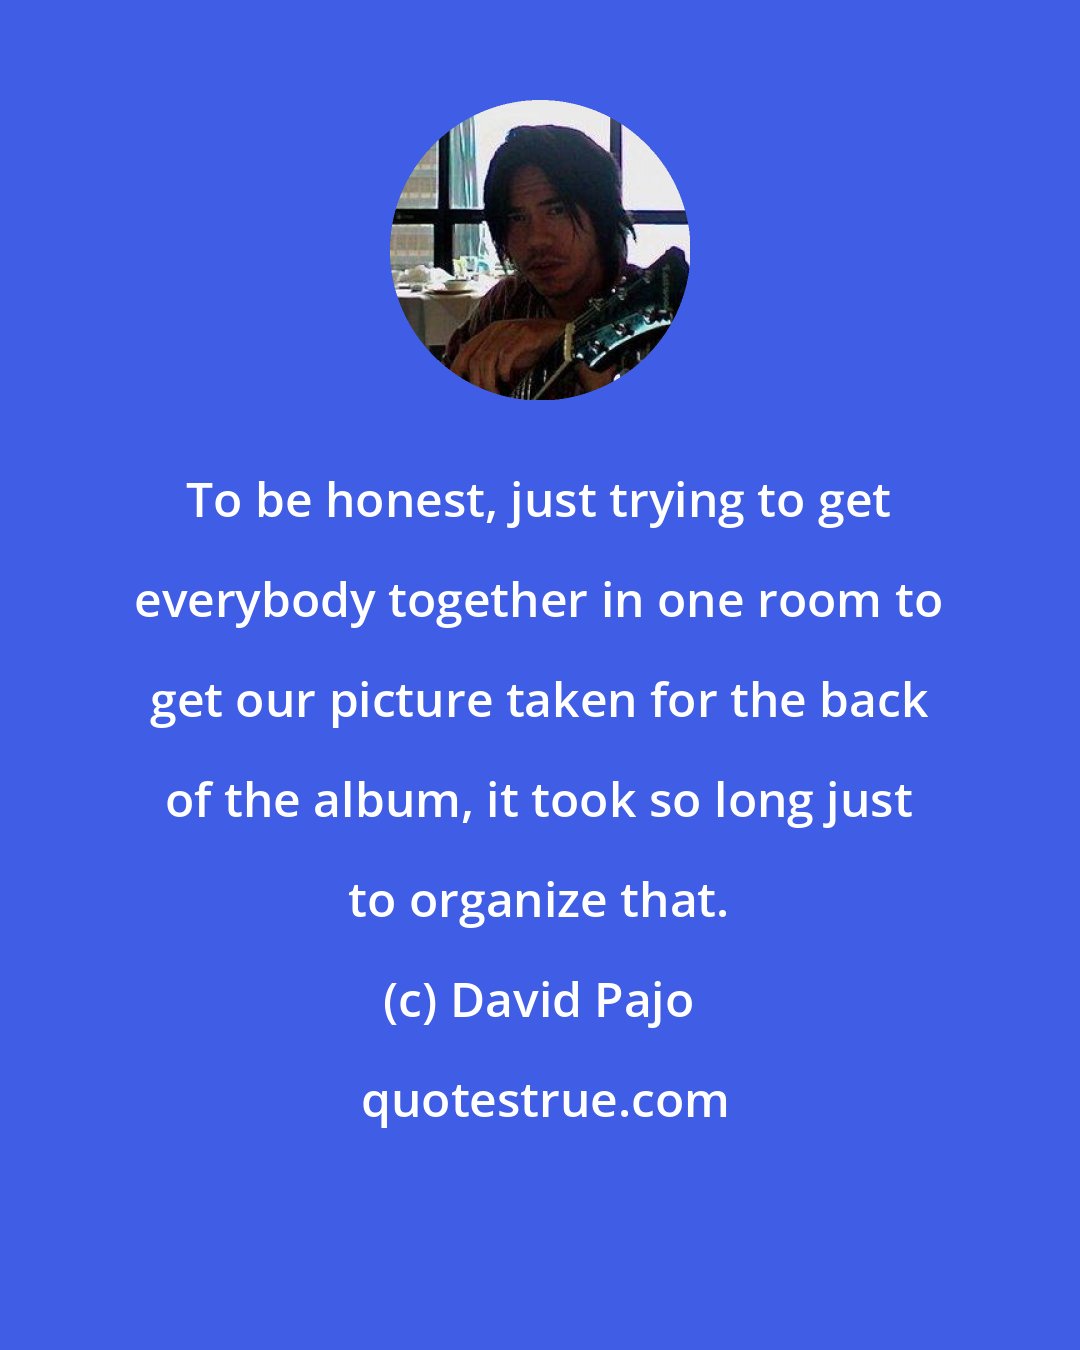 David Pajo: To be honest, just trying to get everybody together in one room to get our picture taken for the back of the album, it took so long just to organize that.